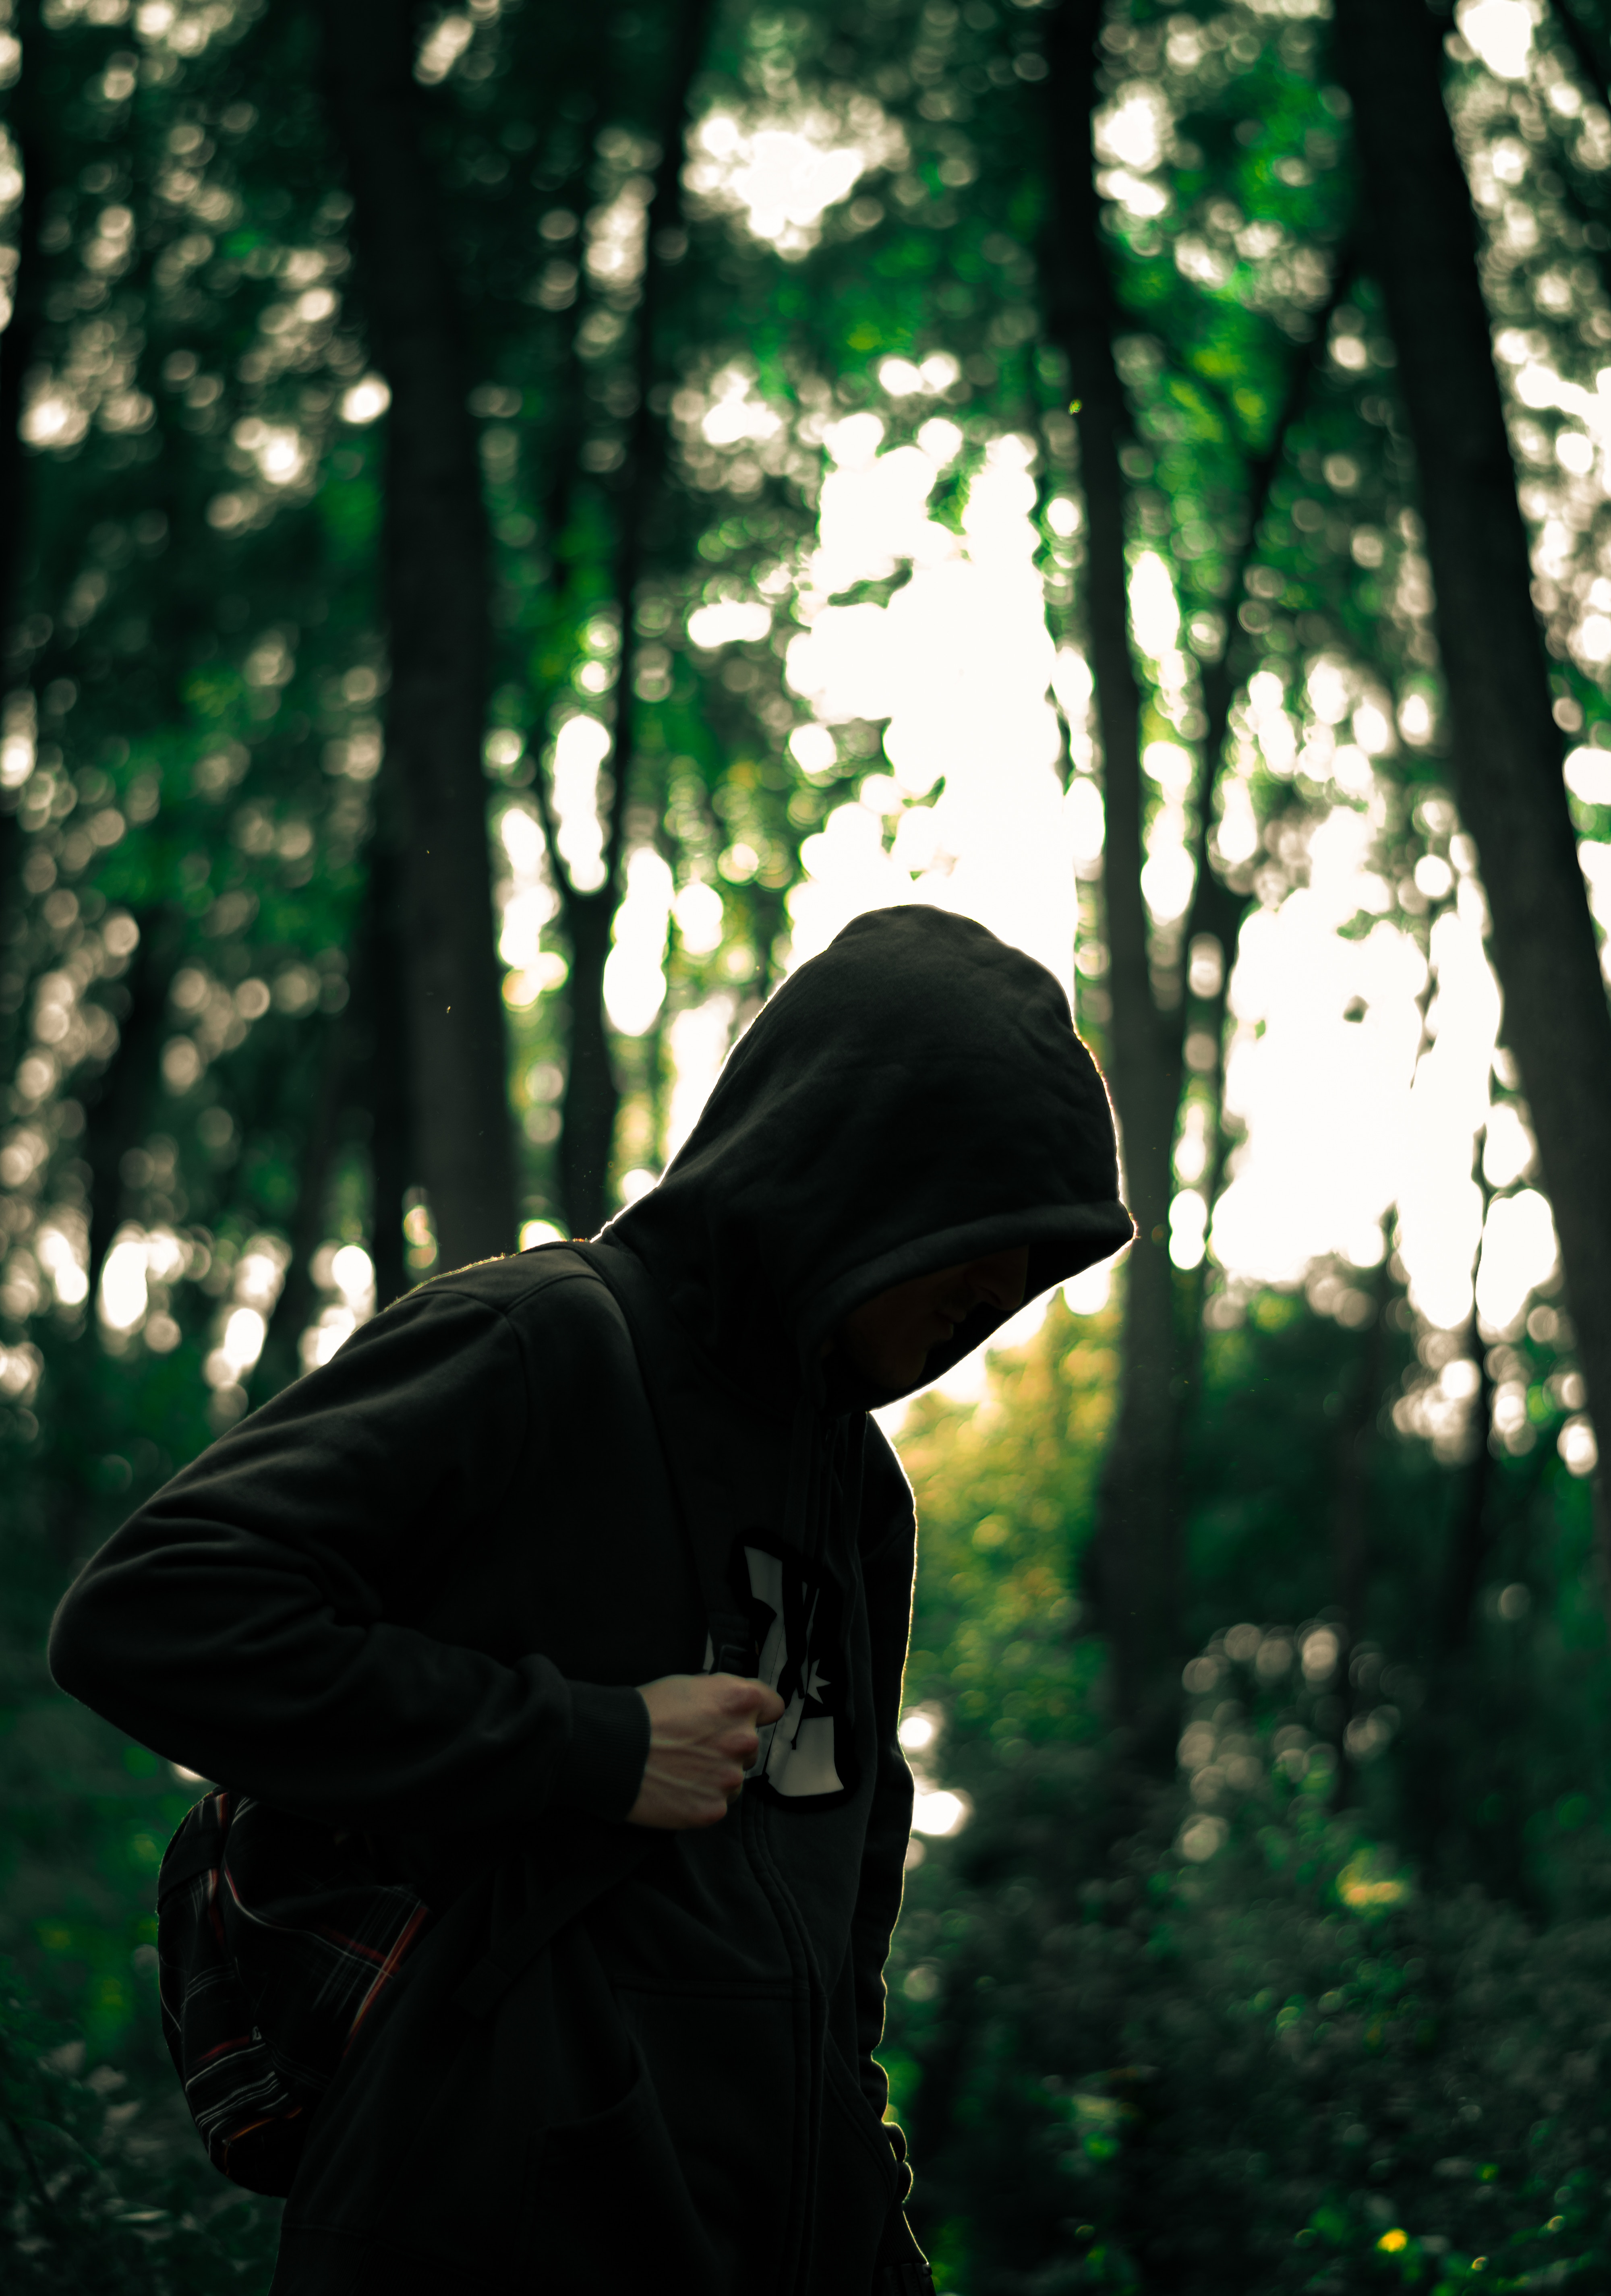 miscellanea, miscellaneous, forest, human, person, anonymous, hood